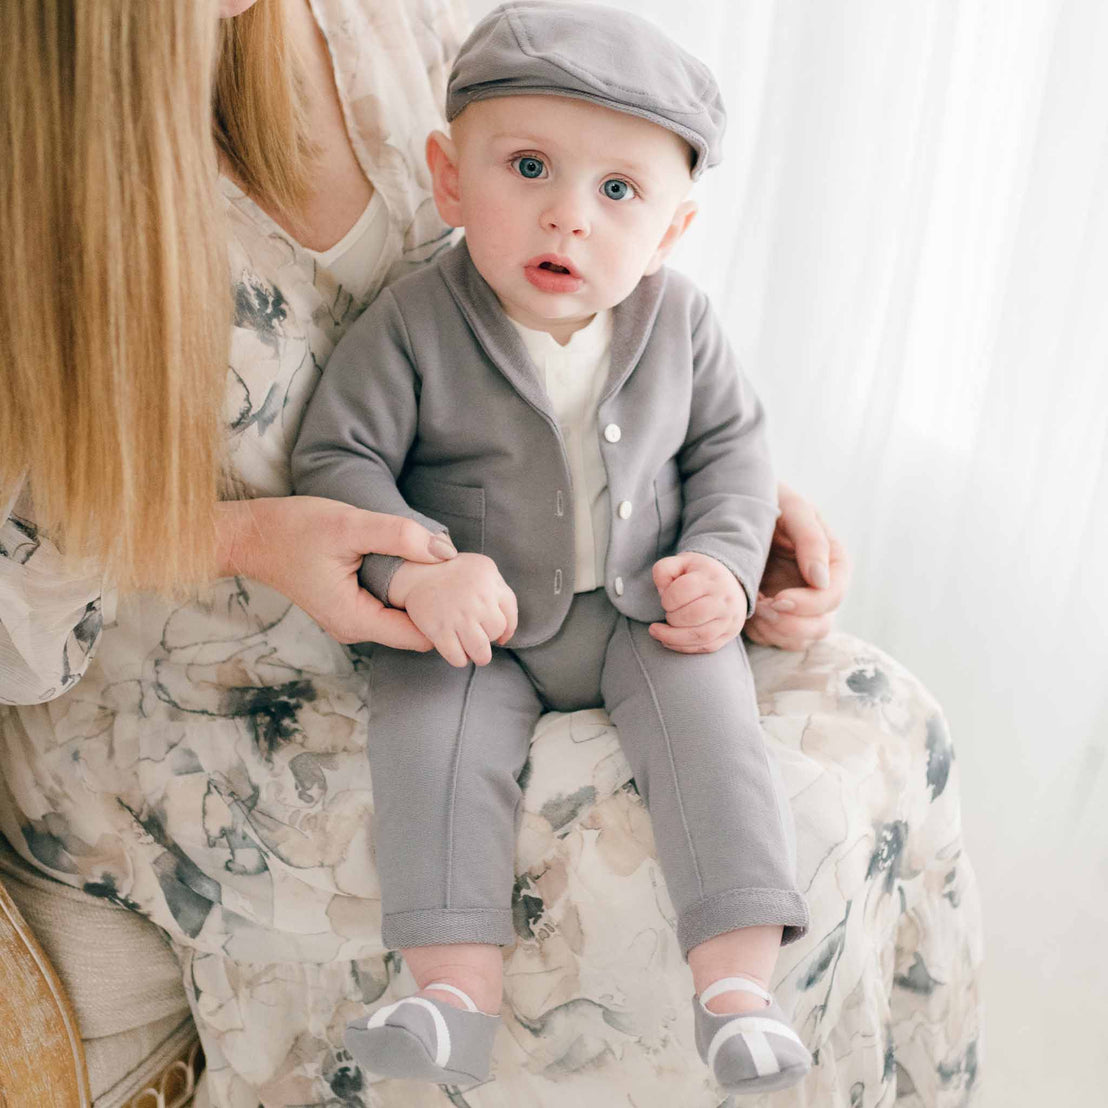 Baby boy sitting in his mother's lap wearing the Milo Grey suit